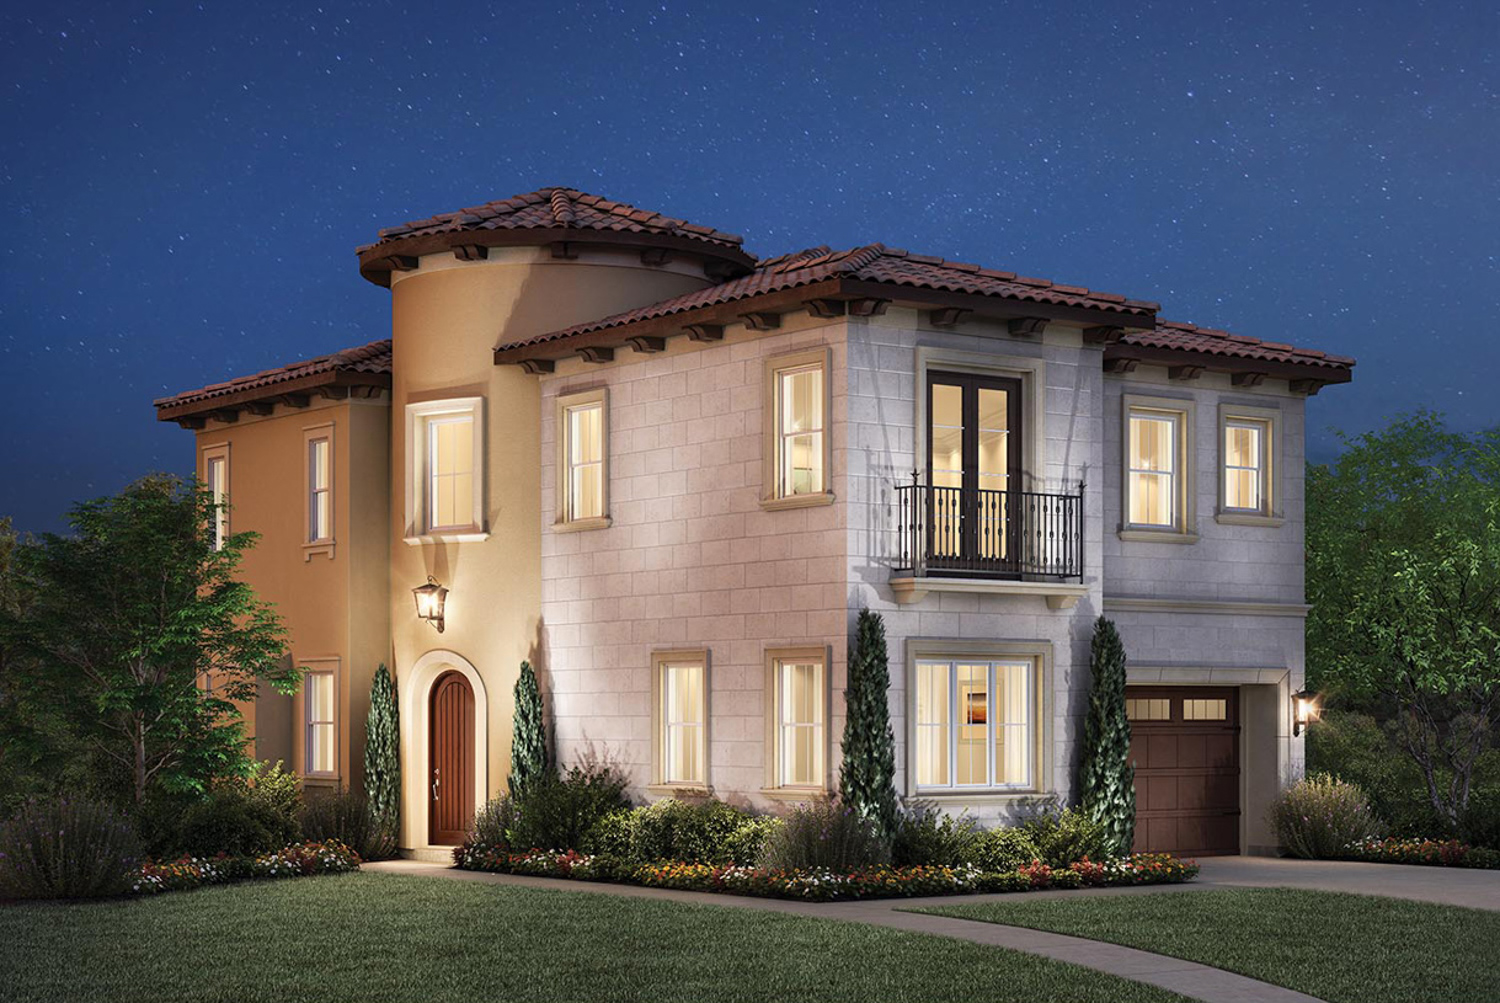 Lot 30 for Serena at Gale Ranch, rendering courtesy Toll Brothers